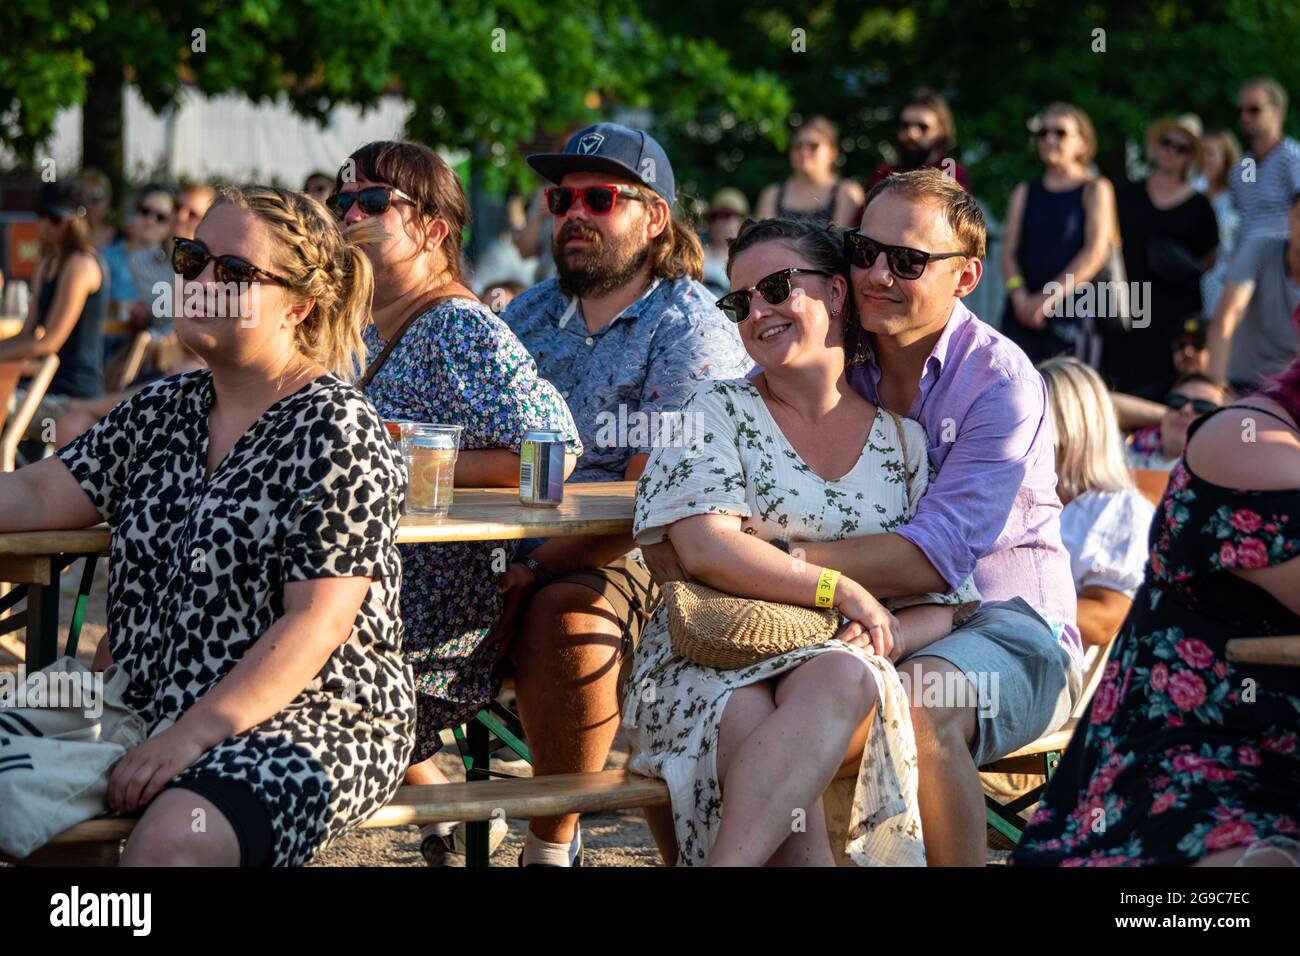 Audience enjoying beverages and music at open-air or outdoor concert Stock Photo